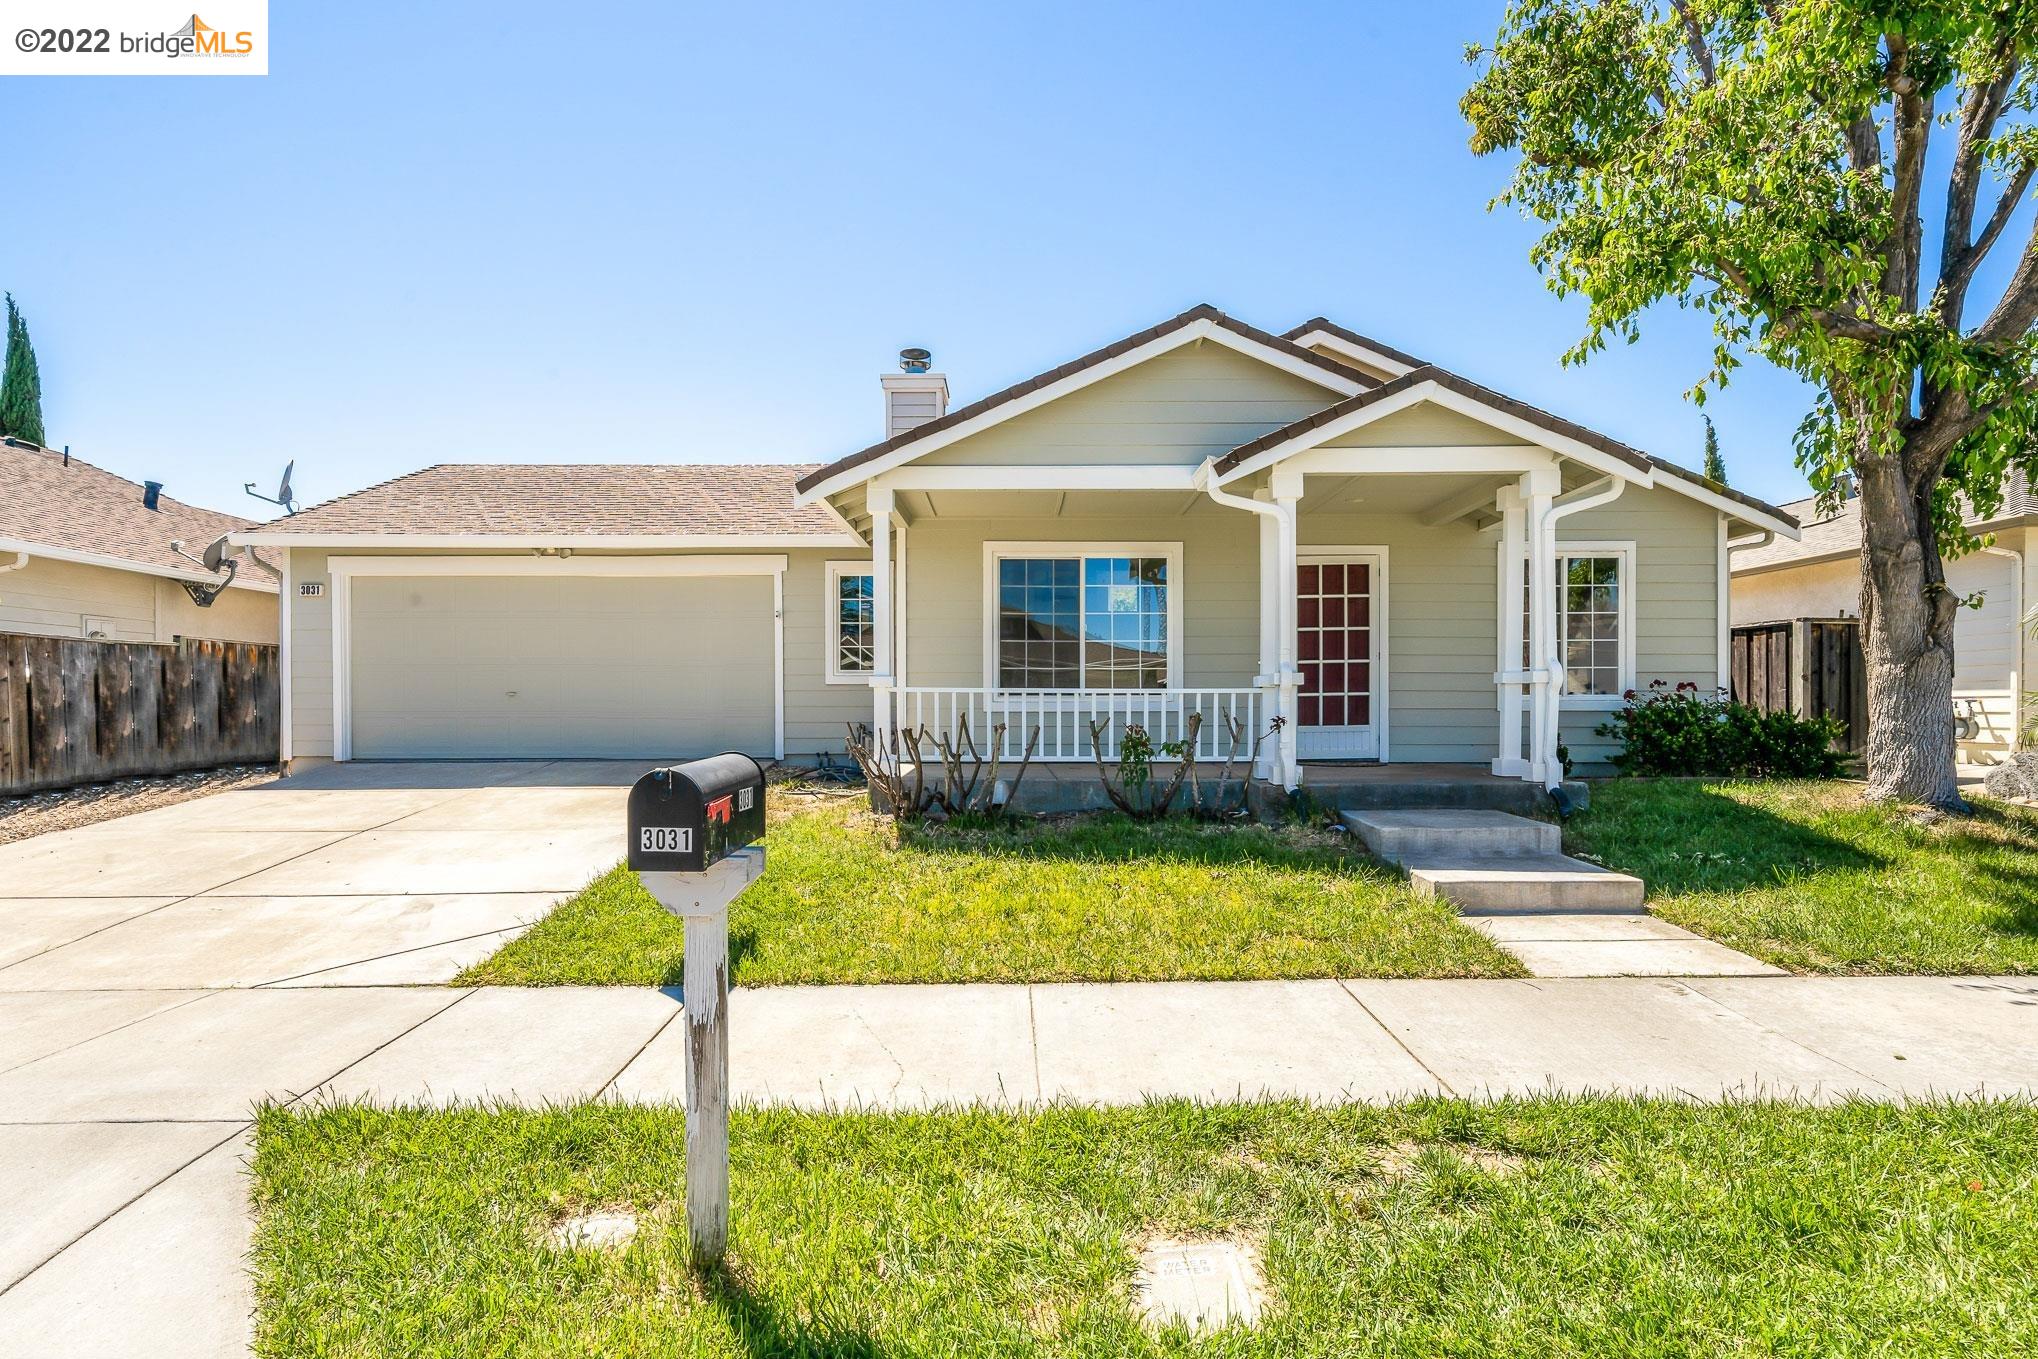 3031 Wright Way, BRENTWOOD, CA 94513